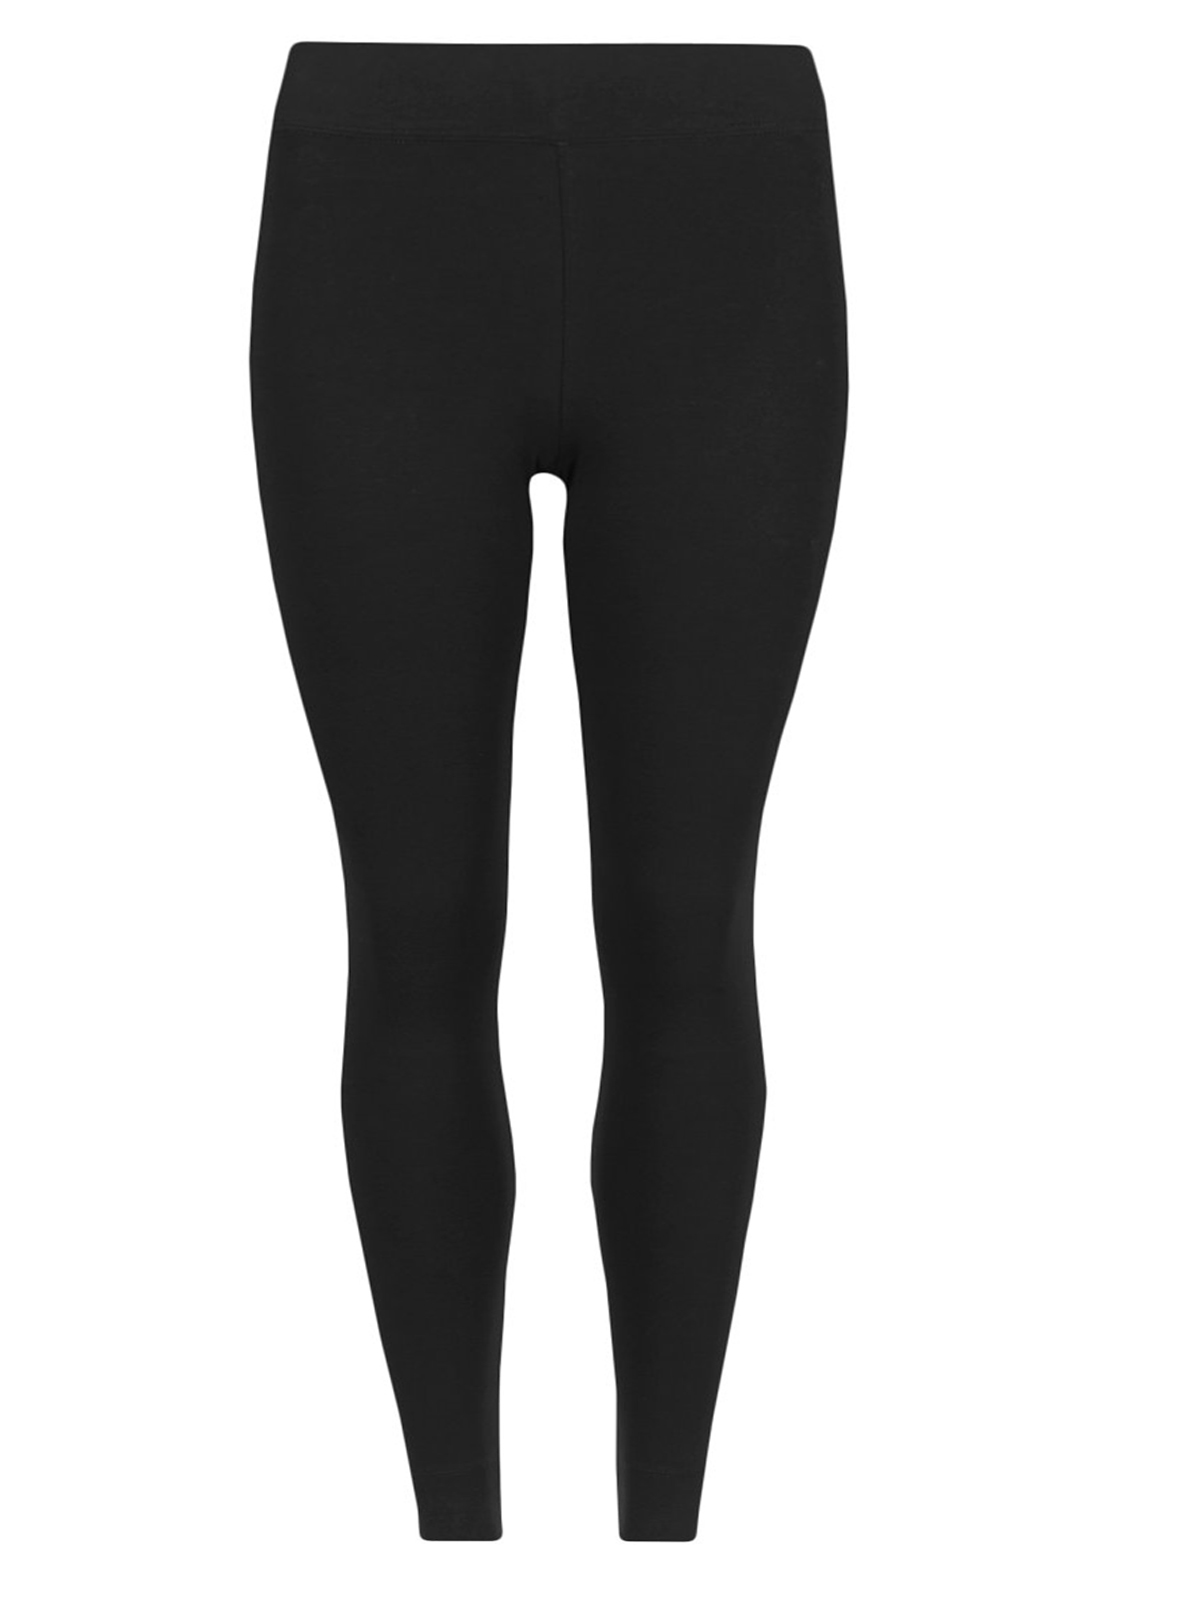 Marks and Spencer - - M&5 BLACK Petite Cotton Rich Leggings - Size 6 to 18